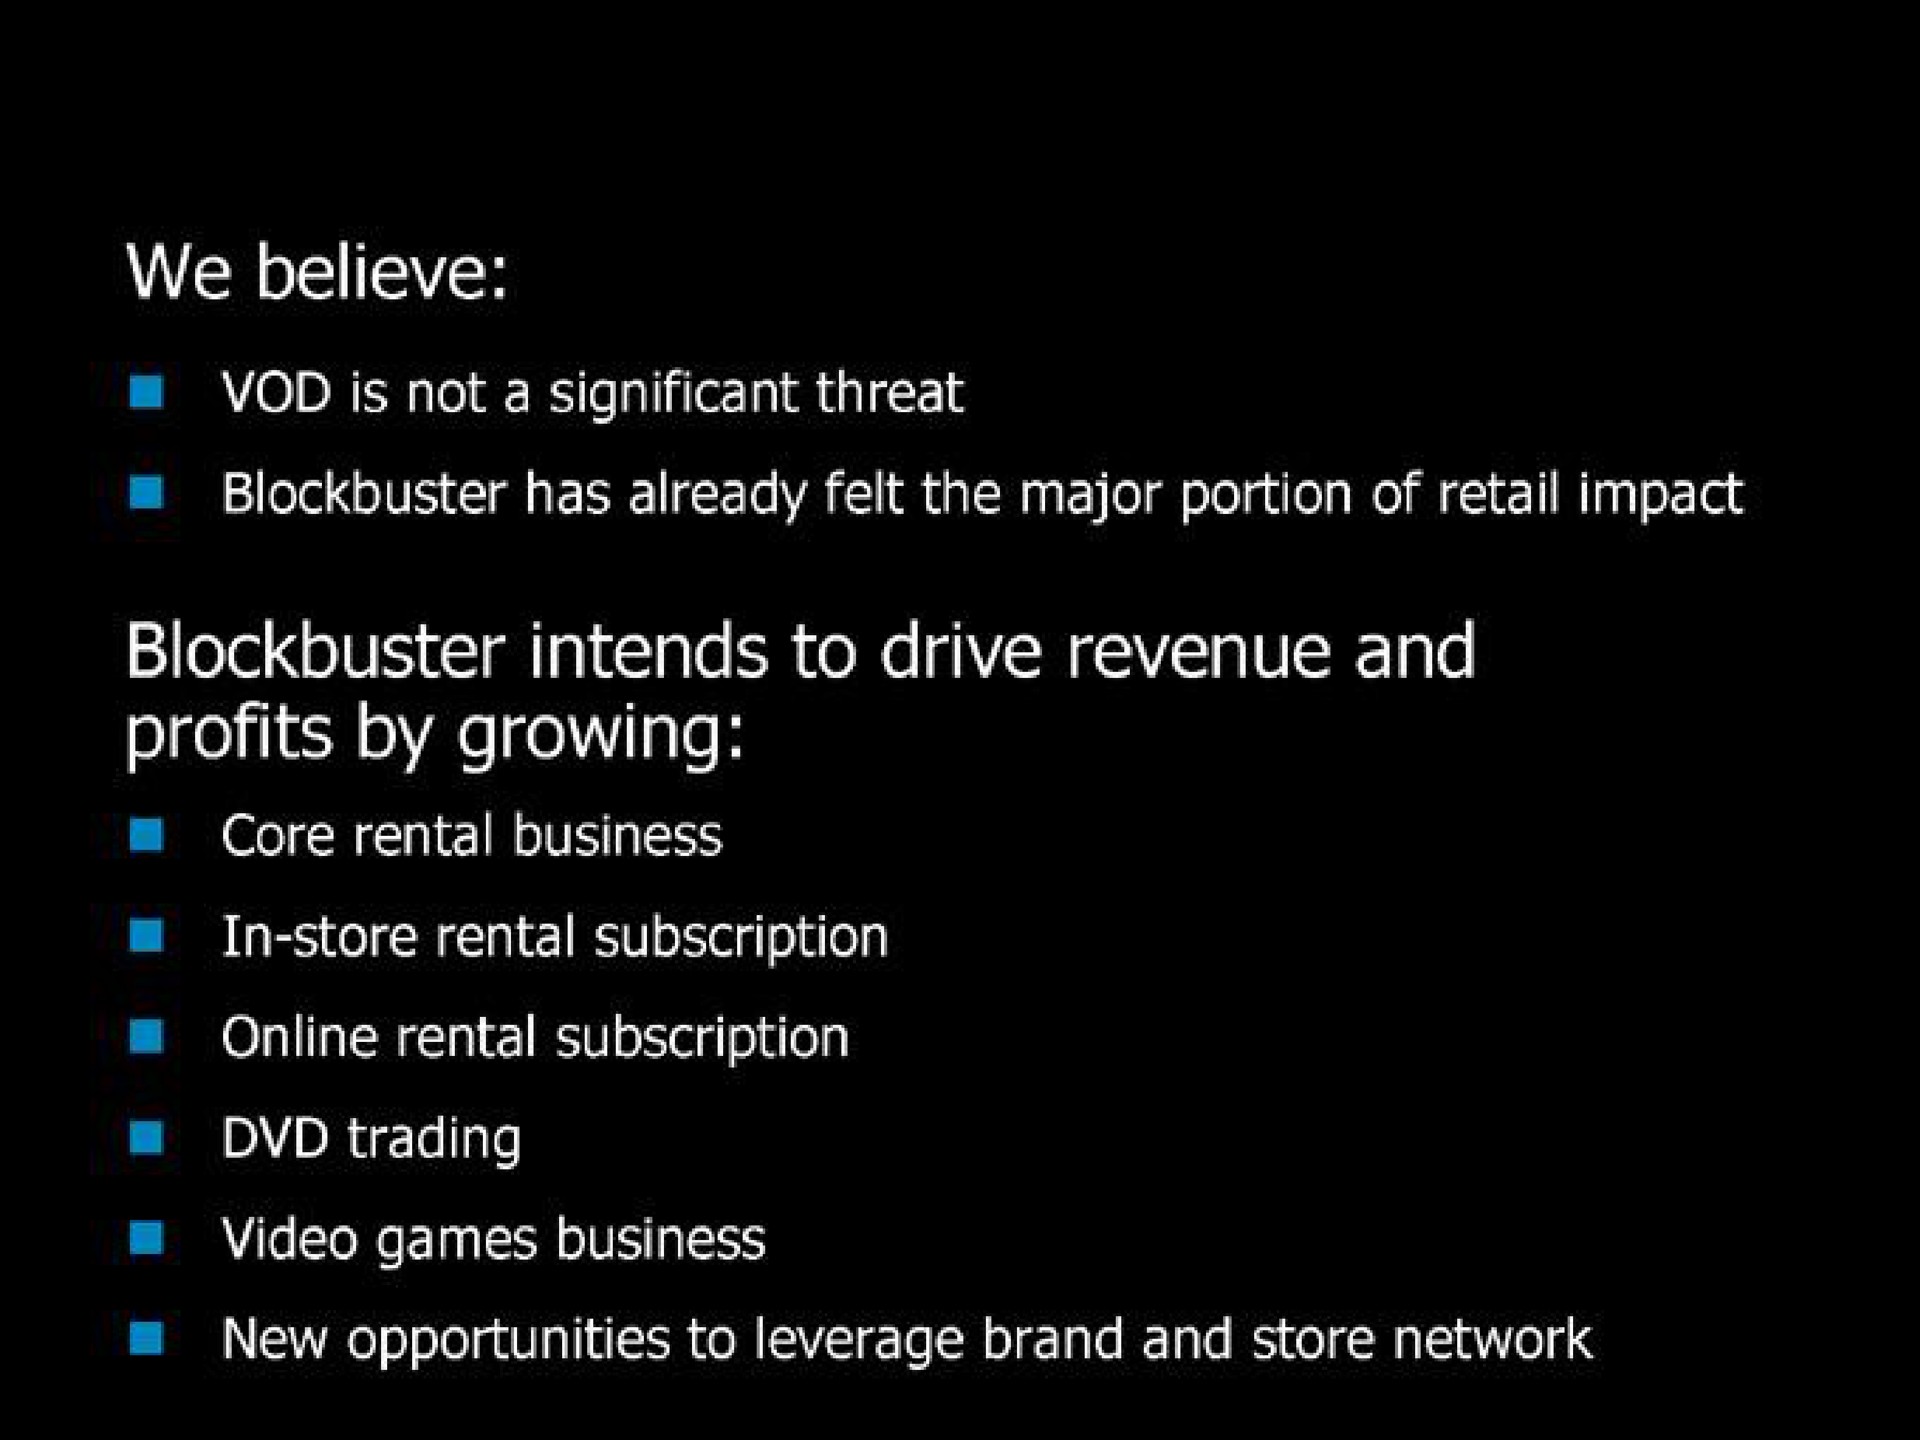 we believe blockbuster intends to drive revenue and profits by growing | Blockbuster Video